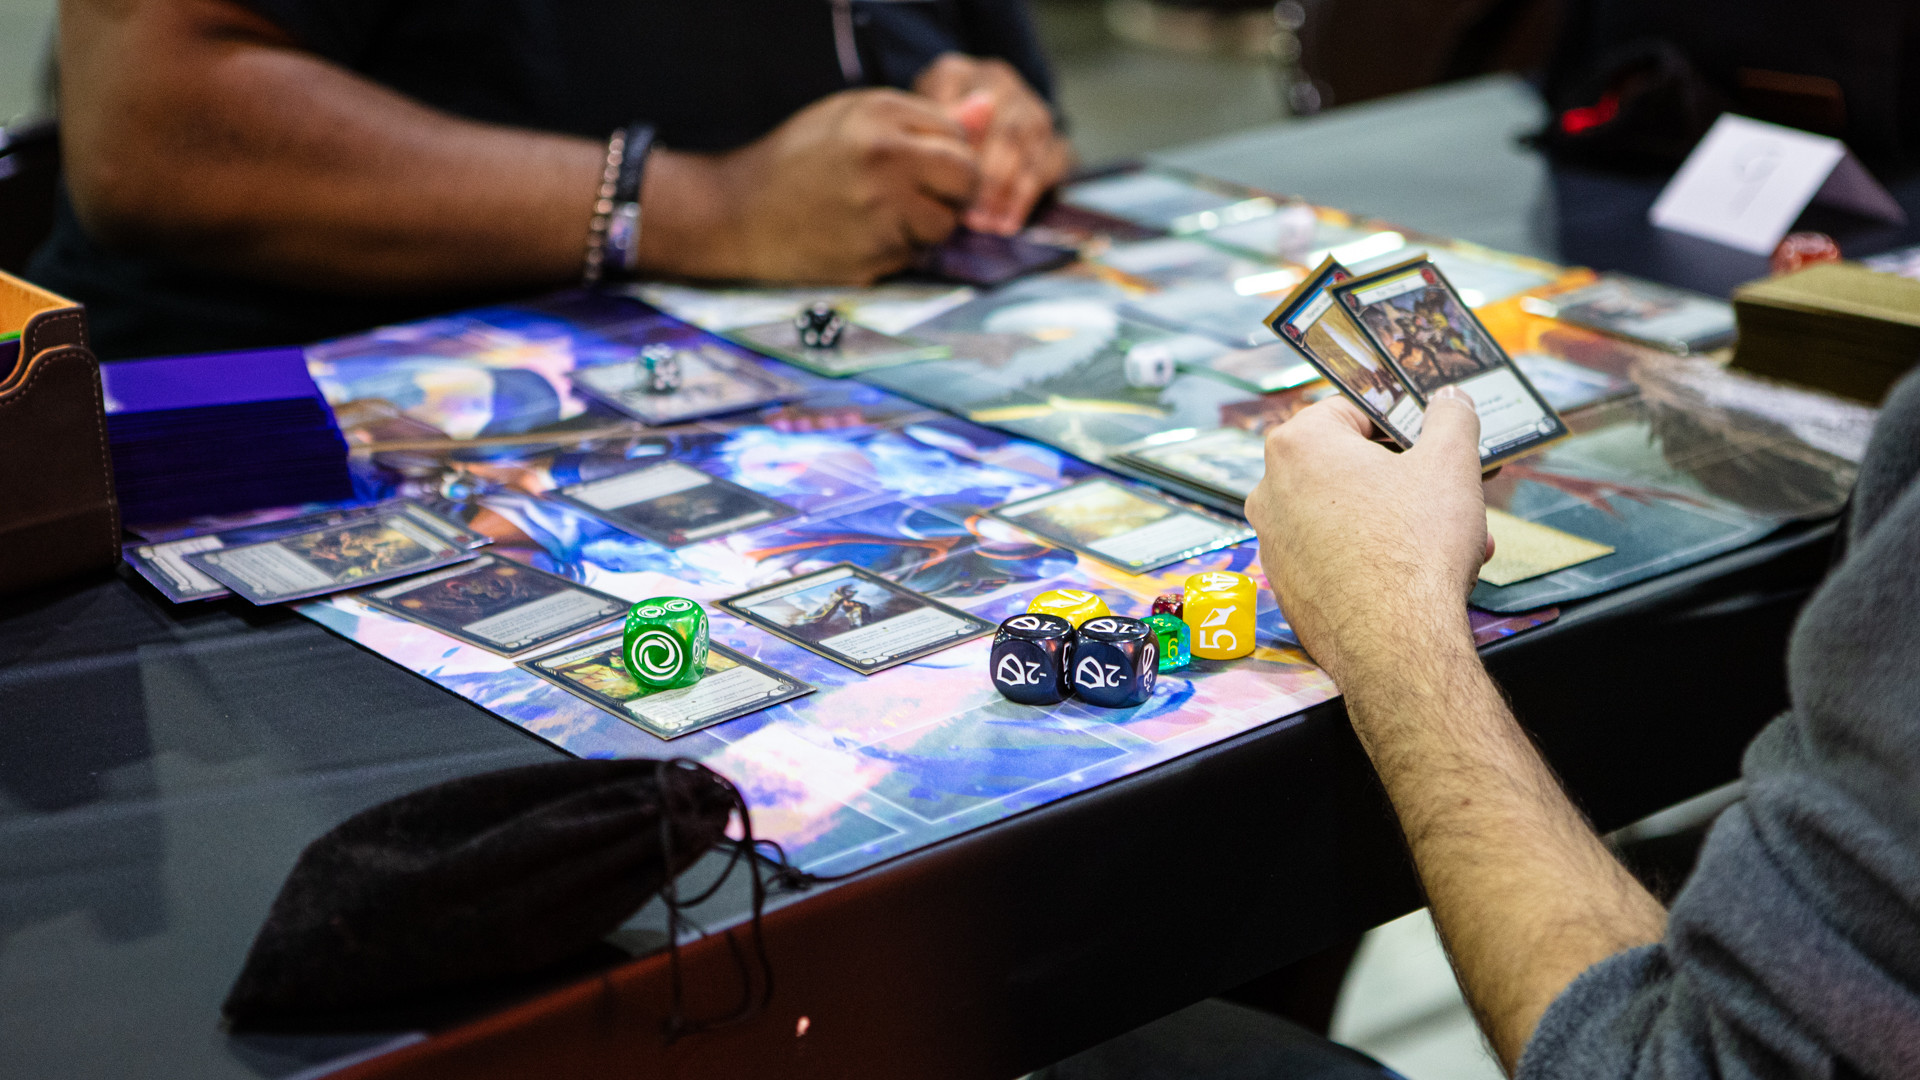 Two players playing a tabletop card game